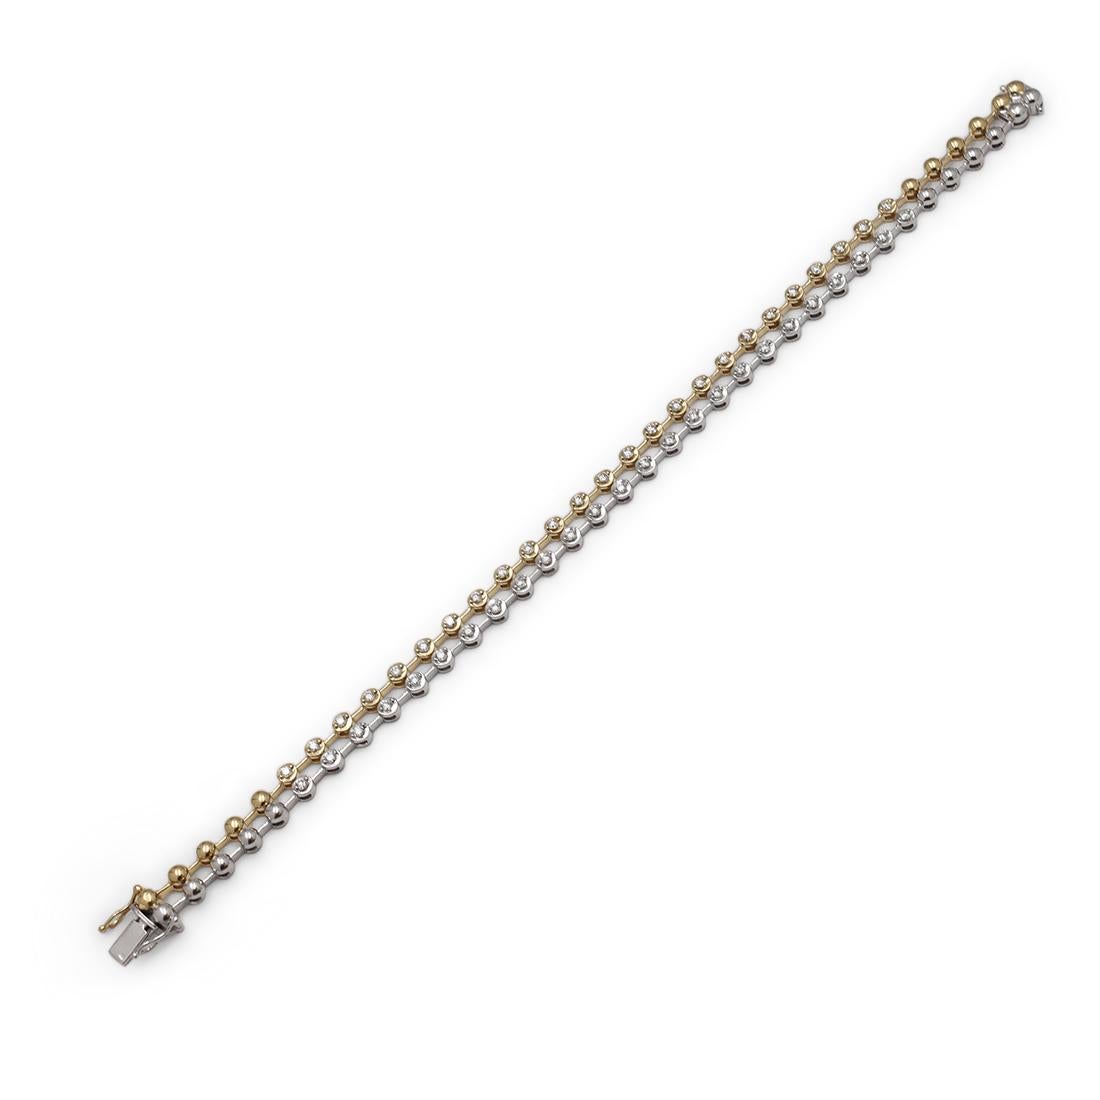 A charming line bracelet crafted in 18 karat yellow and white gold. Two rows of round links are set with round brilliant cut diamonds weighing an estimated .85 carats total. The bracelet measures 7 inches in length with a hidden box clasp. Stamped